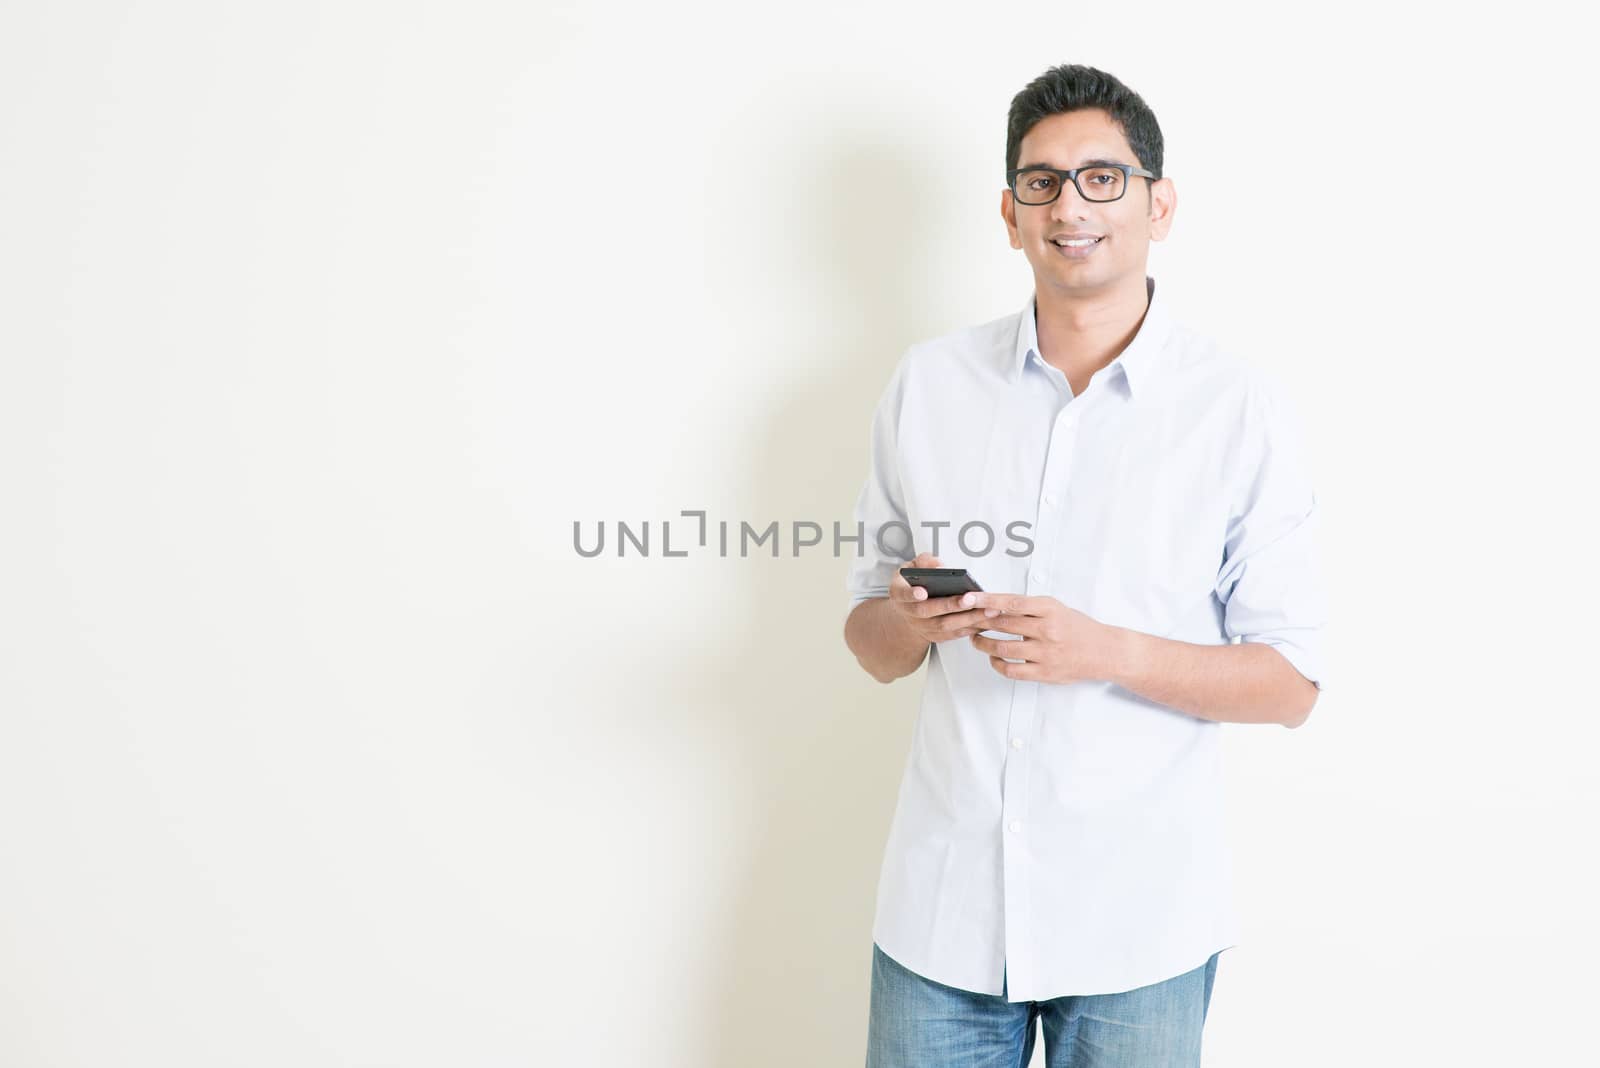 Portrait of handsome casual business Indian man using smartphone, social media concept, standing on plain background with shadow, copy space at side.